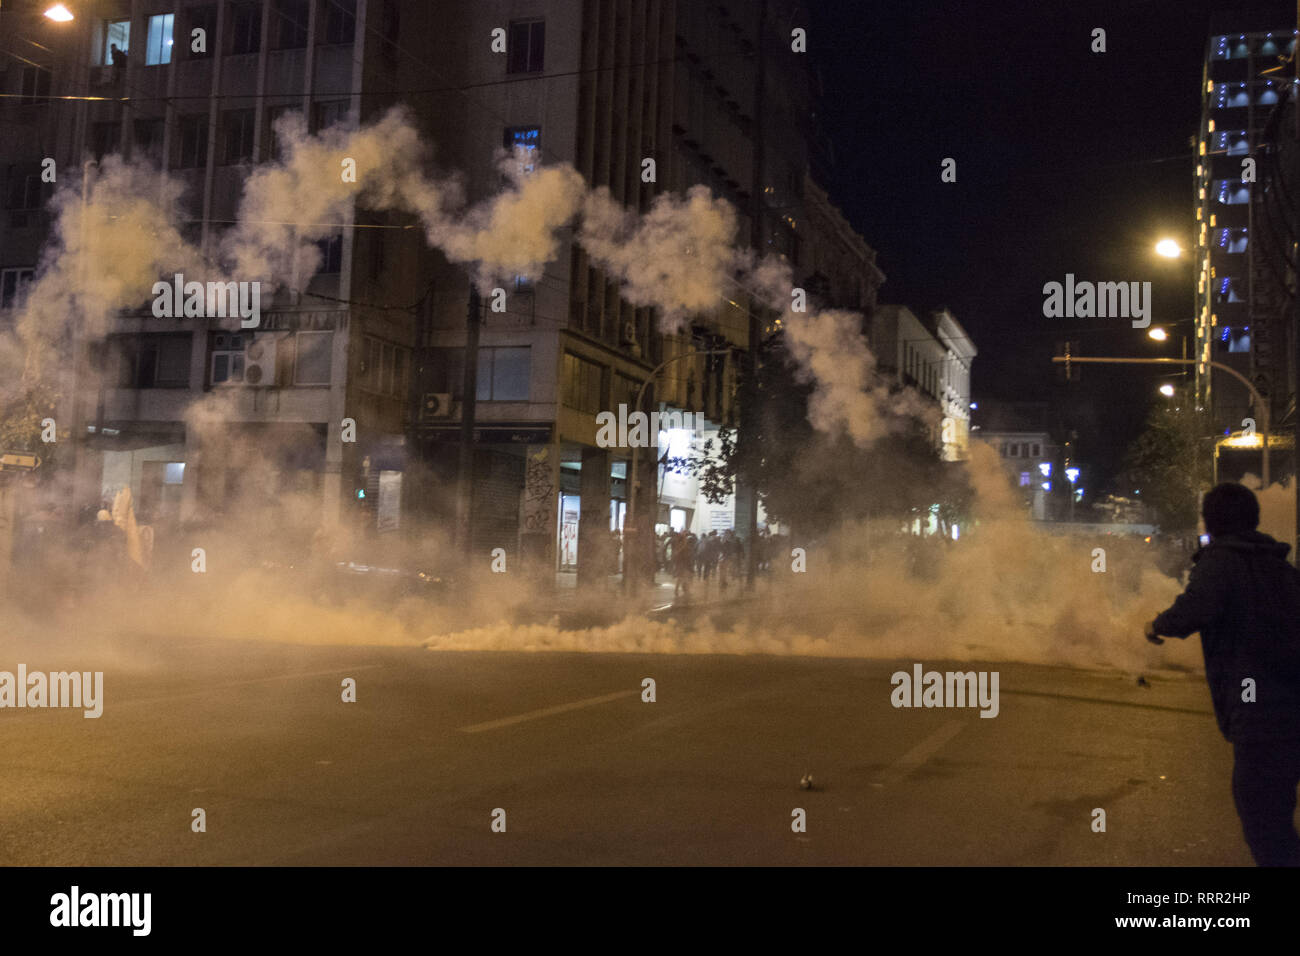 Athens, Greece. 26th Feb, 2019. Police fire tear gas responding to stones thrown at them by protesters who took to the streets over Ebuka's death case. Ebuca Mama Subek, a 34 year old Nigerian migrant, married and father of two children, died while in custody in the Omonia police station in the center of Athens, a police station with a long history of torture, abuse and unexplained deaths cases. Credit: Nikolas Georgiou/ZUMA Wire/Alamy Live News Stock Photo